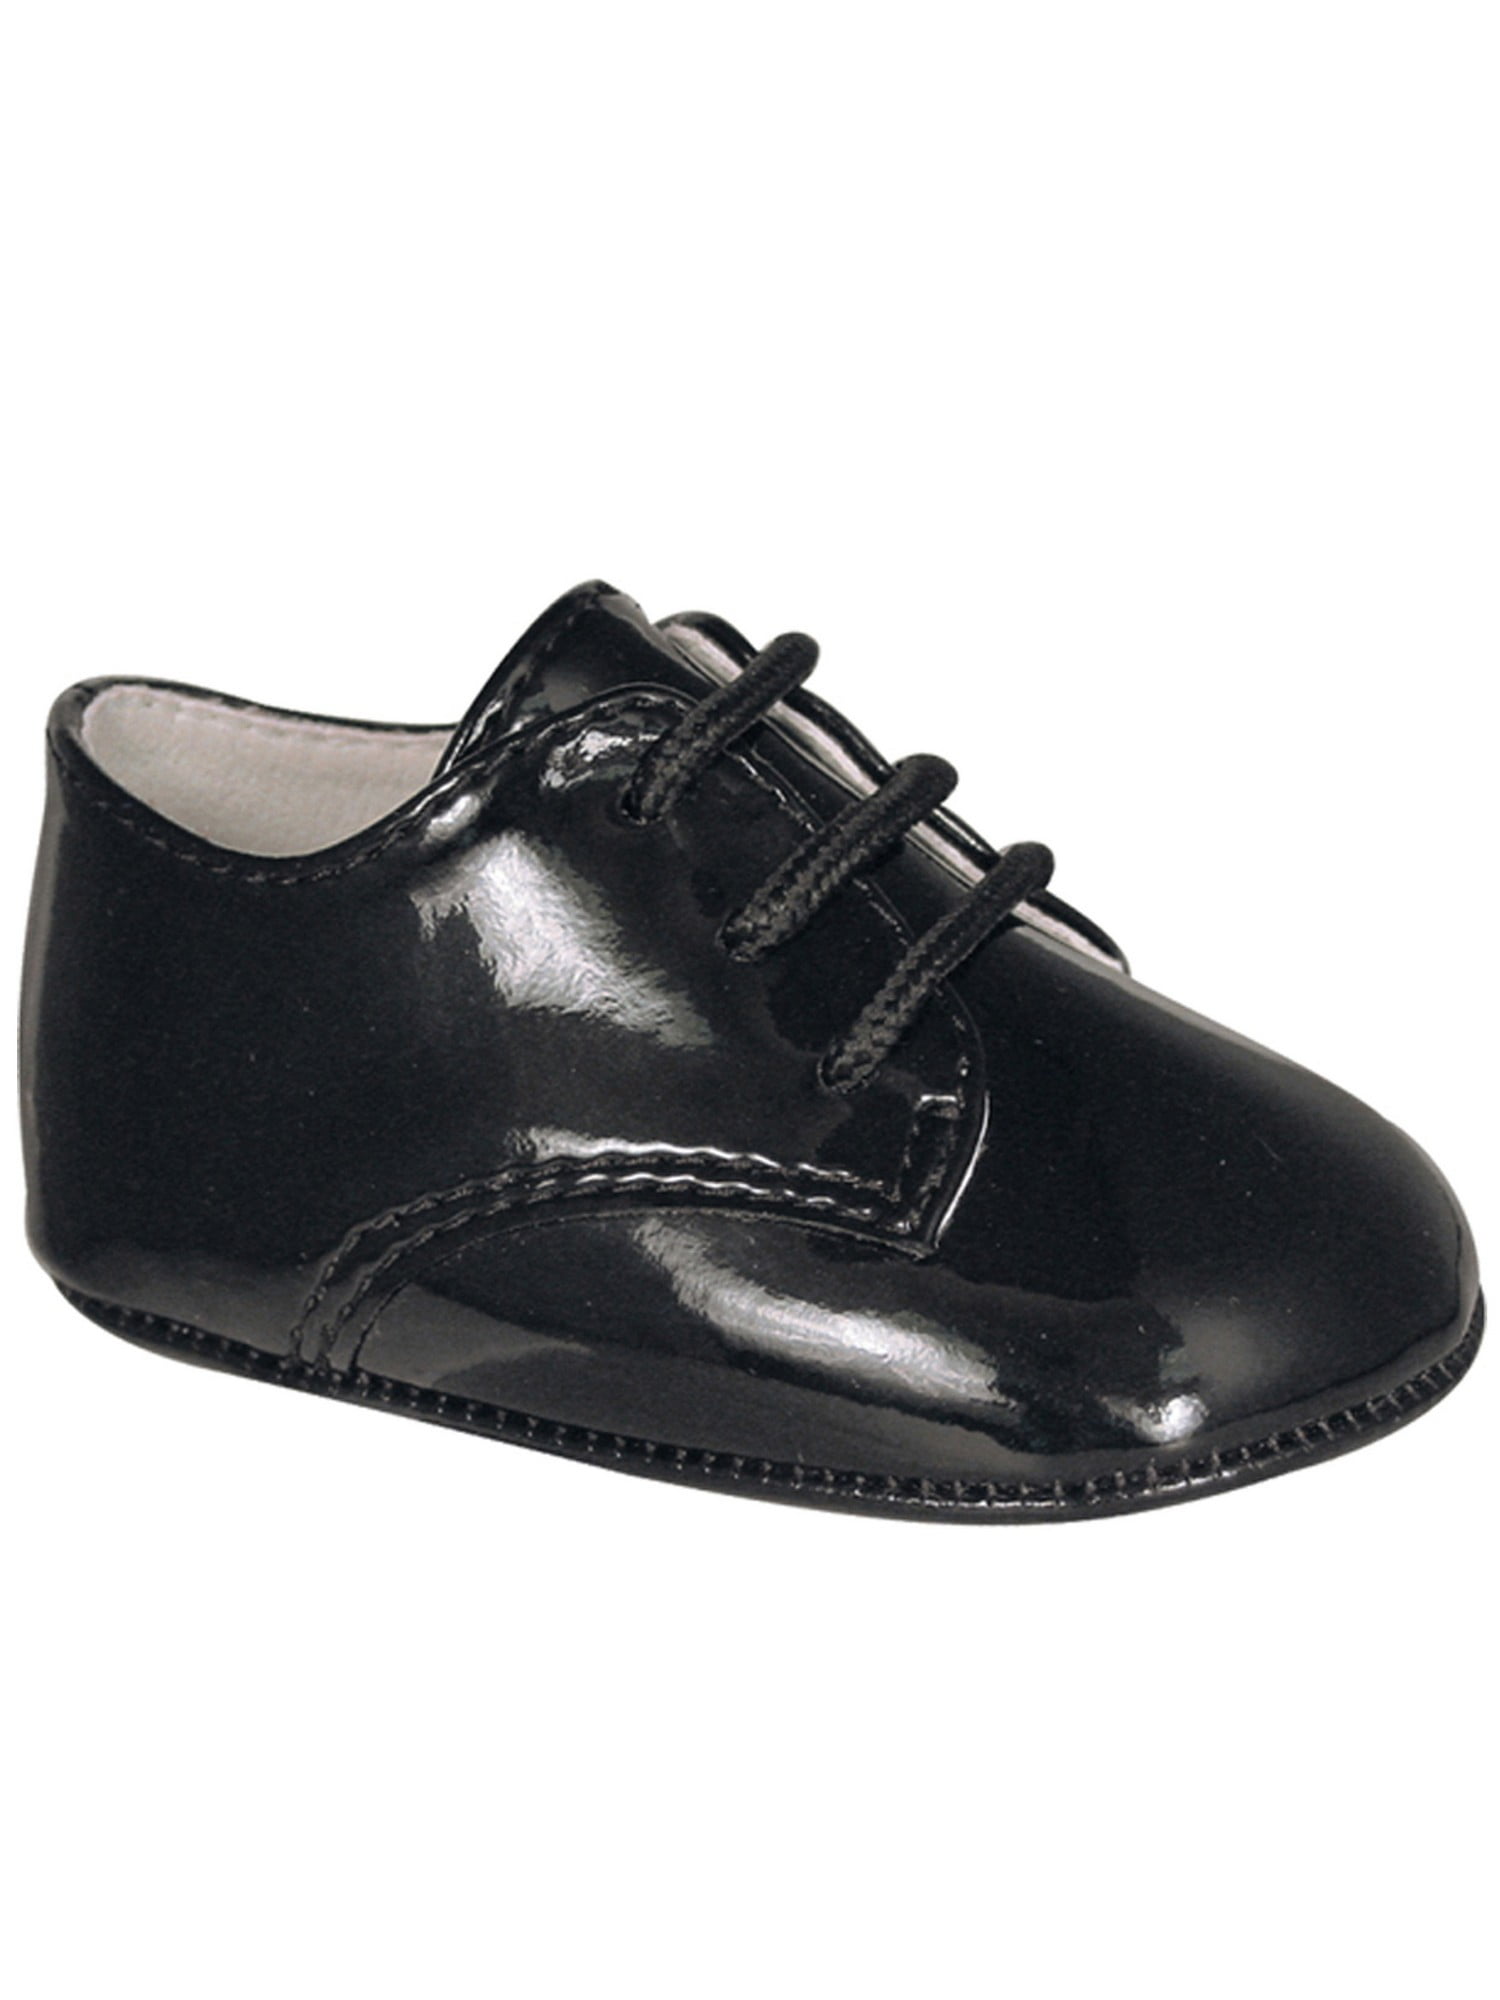 Baby Black Soft Brogues Shoes 